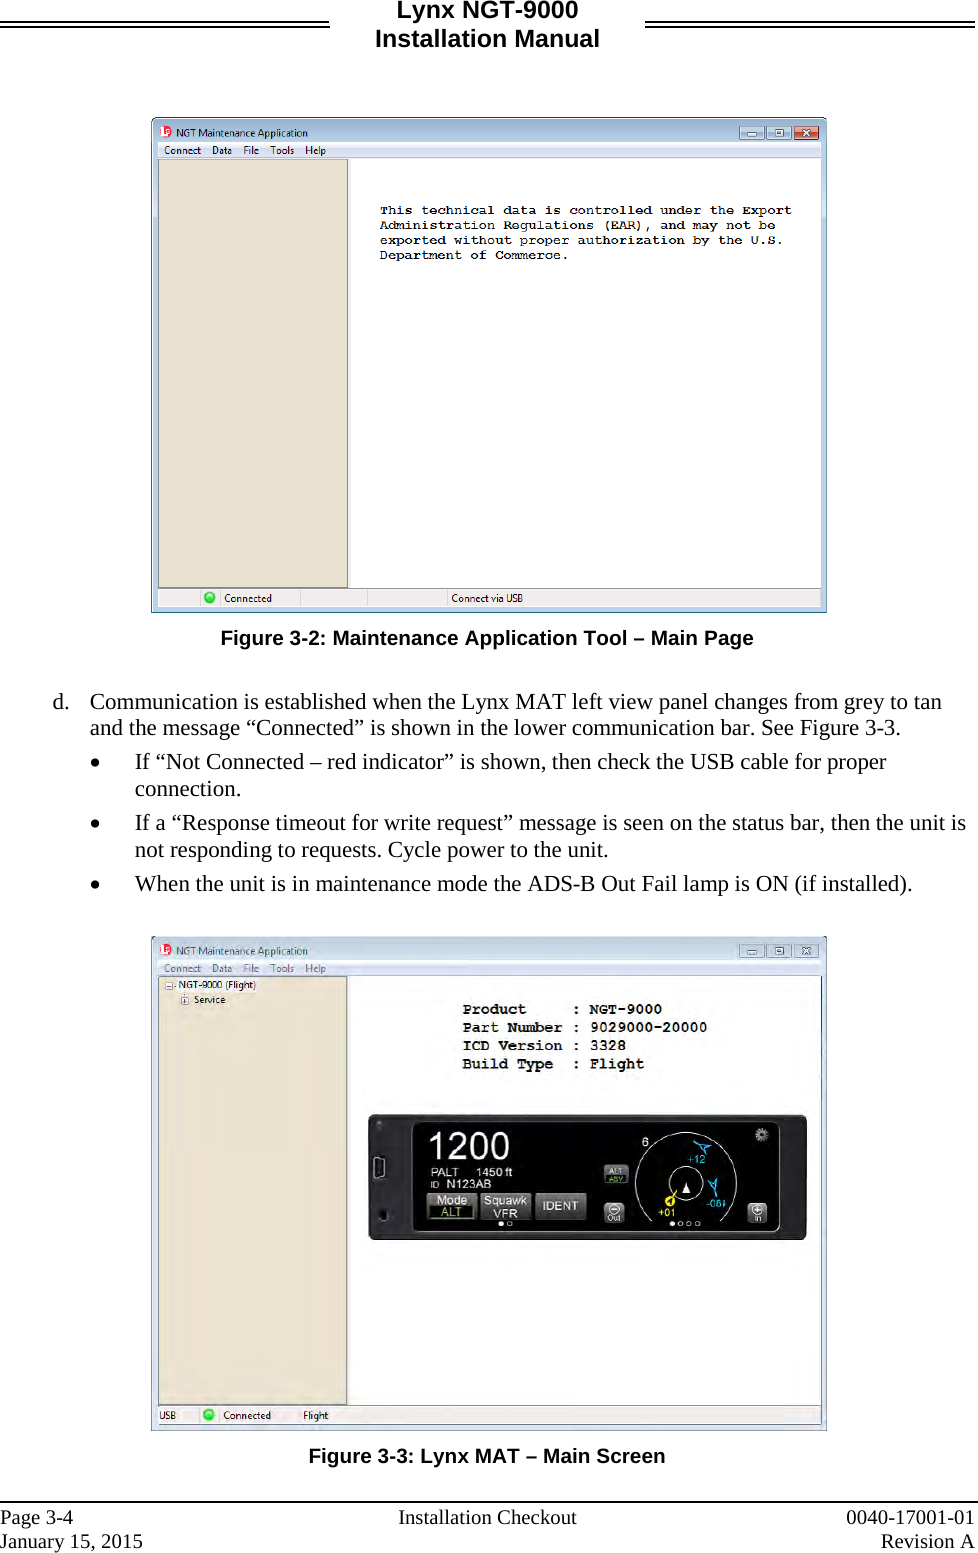 Lynx NGT-9000 Installation Manual    Figure 3-2: Maintenance Application Tool – Main Page  d. Communication is established when the Lynx MAT left view panel changes from grey to tan and the message “Connected” is shown in the lower communication bar. See Figure 3-3. • If “Not Connected – red indicator” is shown, then check the USB cable for proper connection. • If a “Response timeout for write request” message is seen on the status bar, then the unit is not responding to requests. Cycle power to the unit.  • When the unit is in maintenance mode the ADS-B Out Fail lamp is ON (if installed).   Figure 3-3: Lynx MAT – Main Screen    Page 3-4   Installation Checkout 0040-17001-01 January 15, 2015    Revision A  